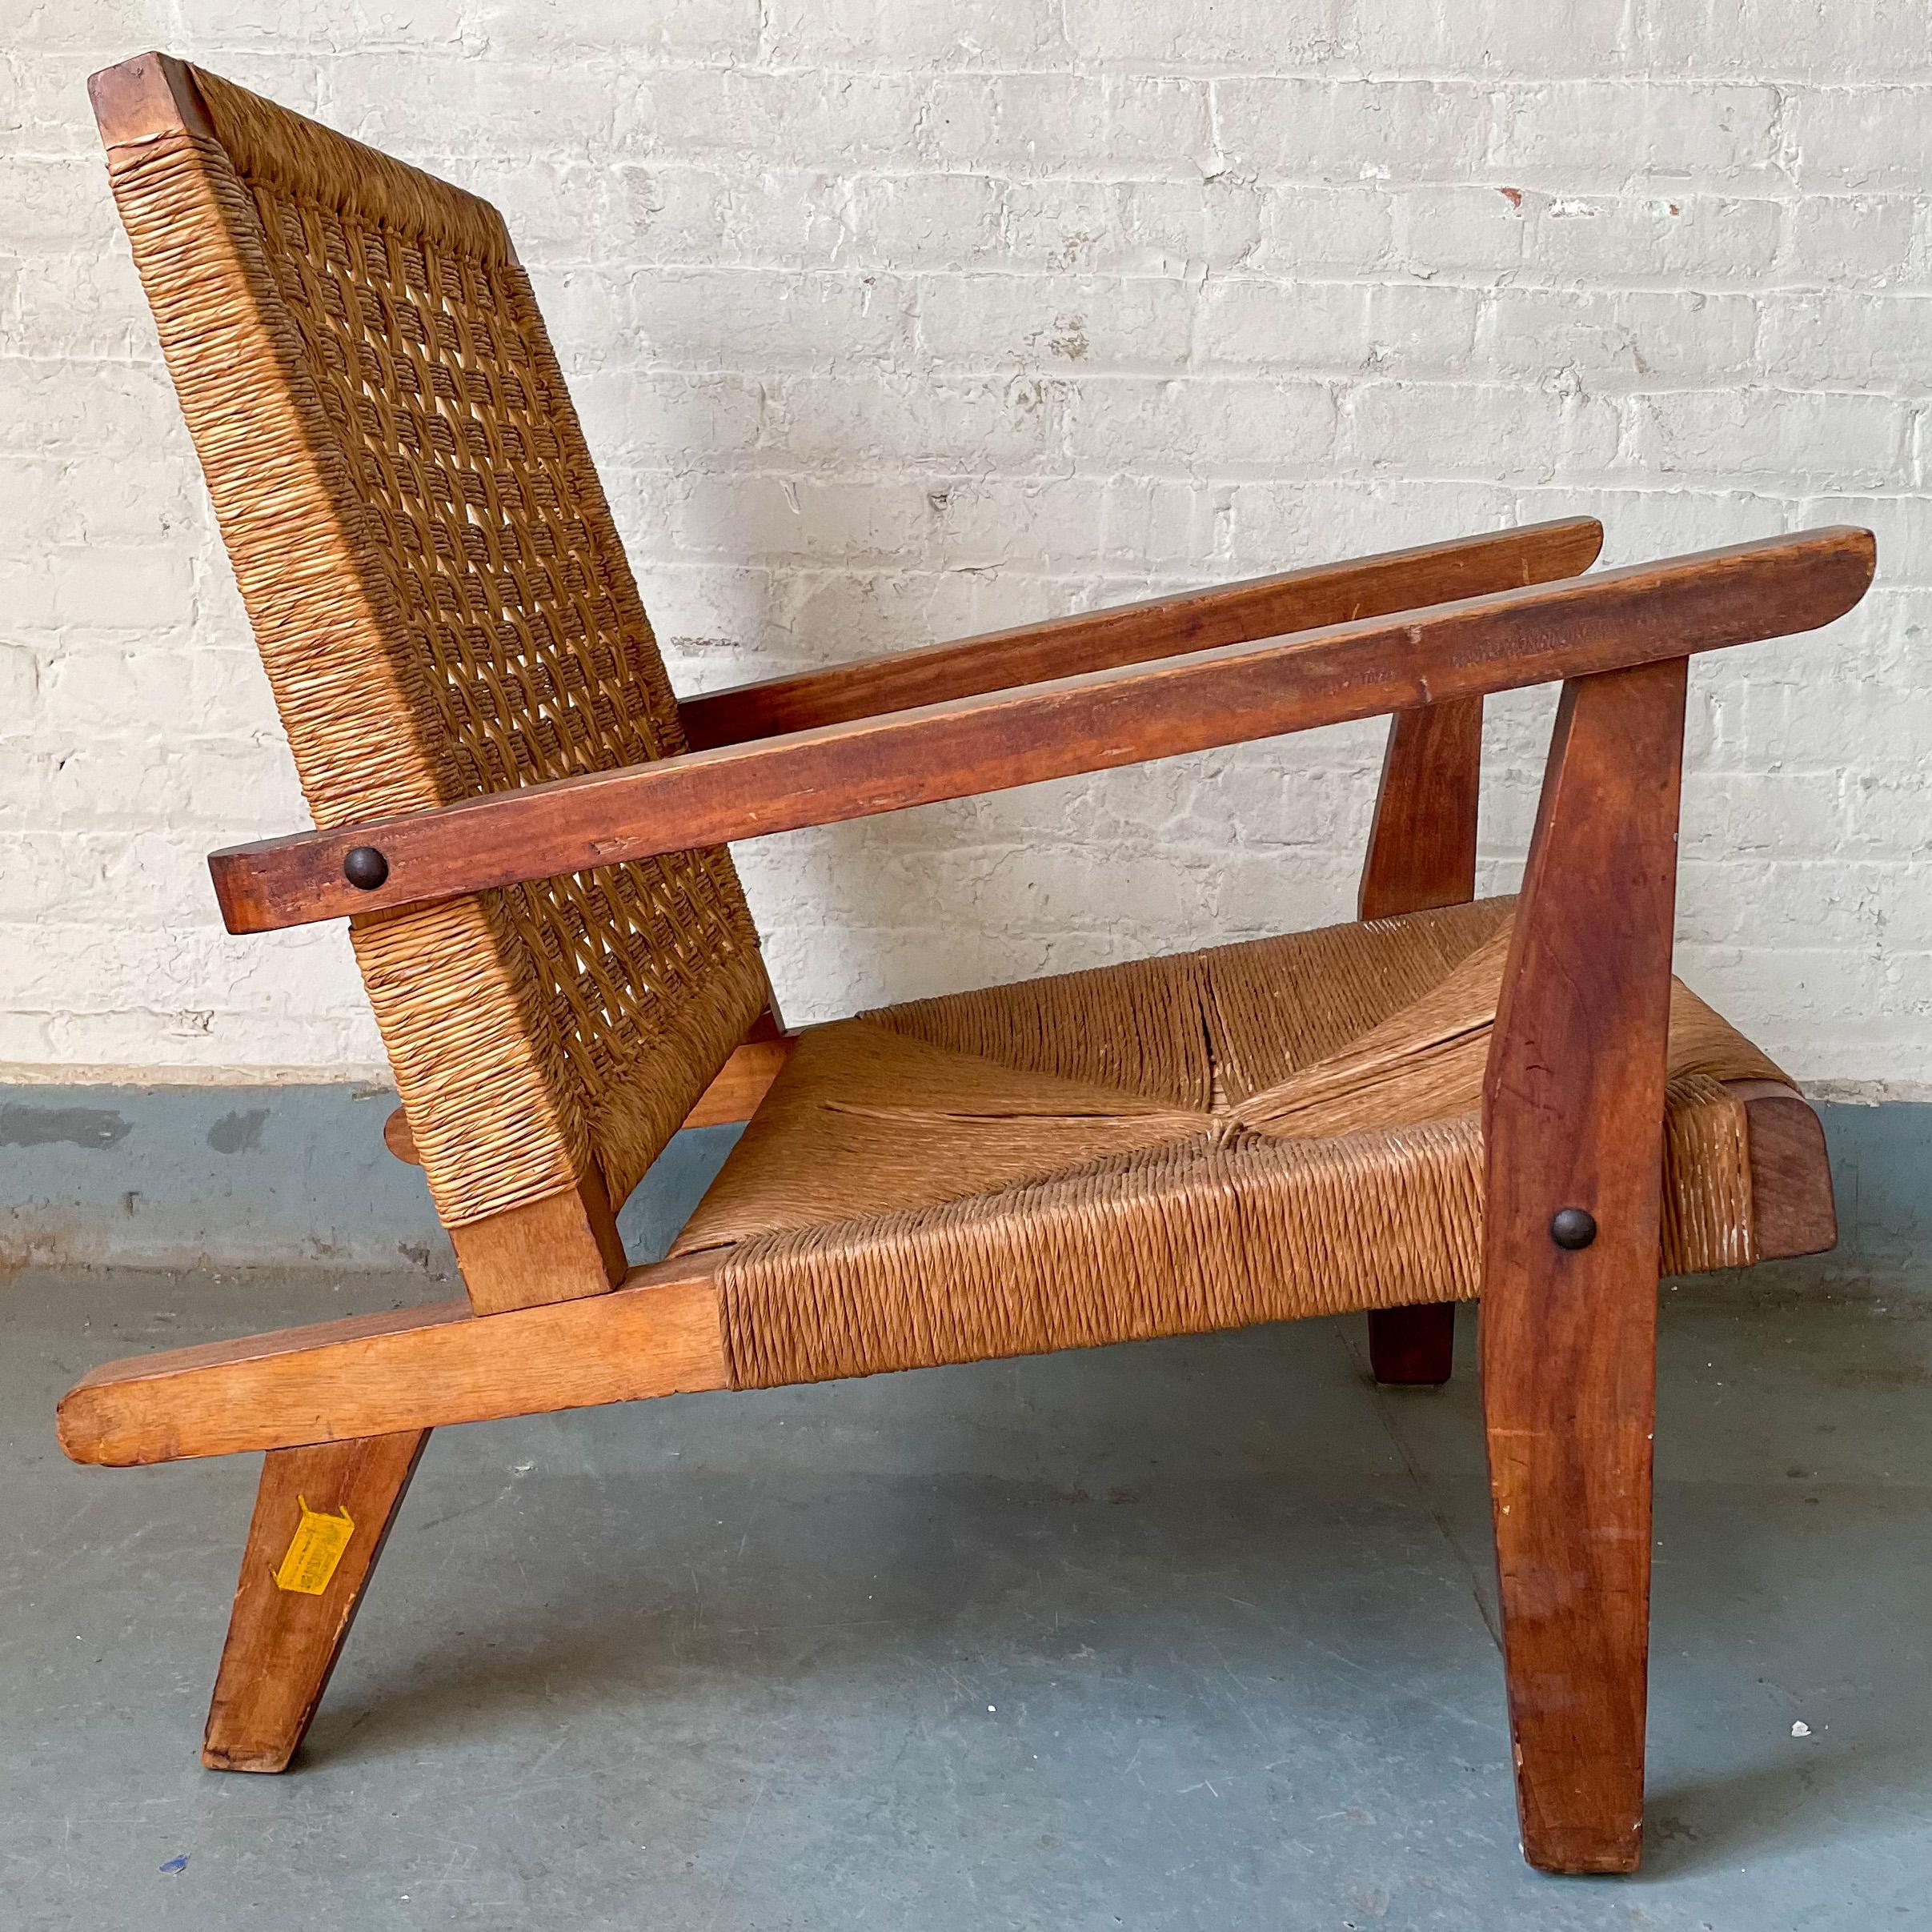 Knock-down lounge chair with arms in solid carved pine with a woven plasticized palm seat and back, in the manner of Clara Porset, produced by Muebles Austin of Mexico City, 1950’s. The chair is designed to disassemble via a loose mortise-and-tenon